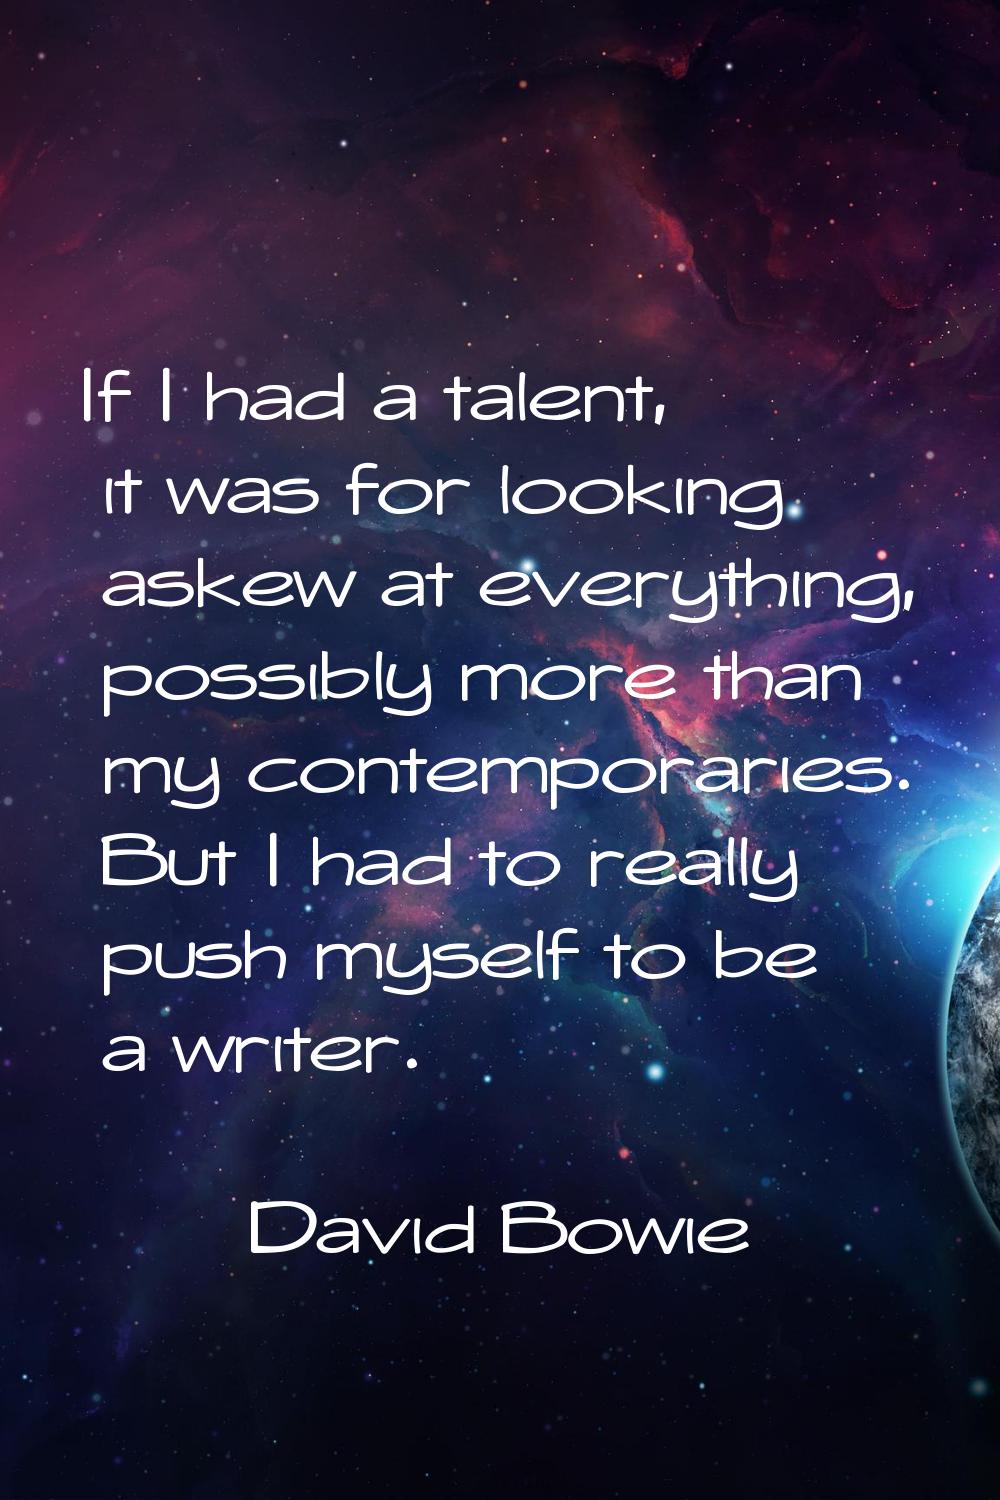 If I had a talent, it was for looking askew at everything, possibly more than my contemporaries. Bu